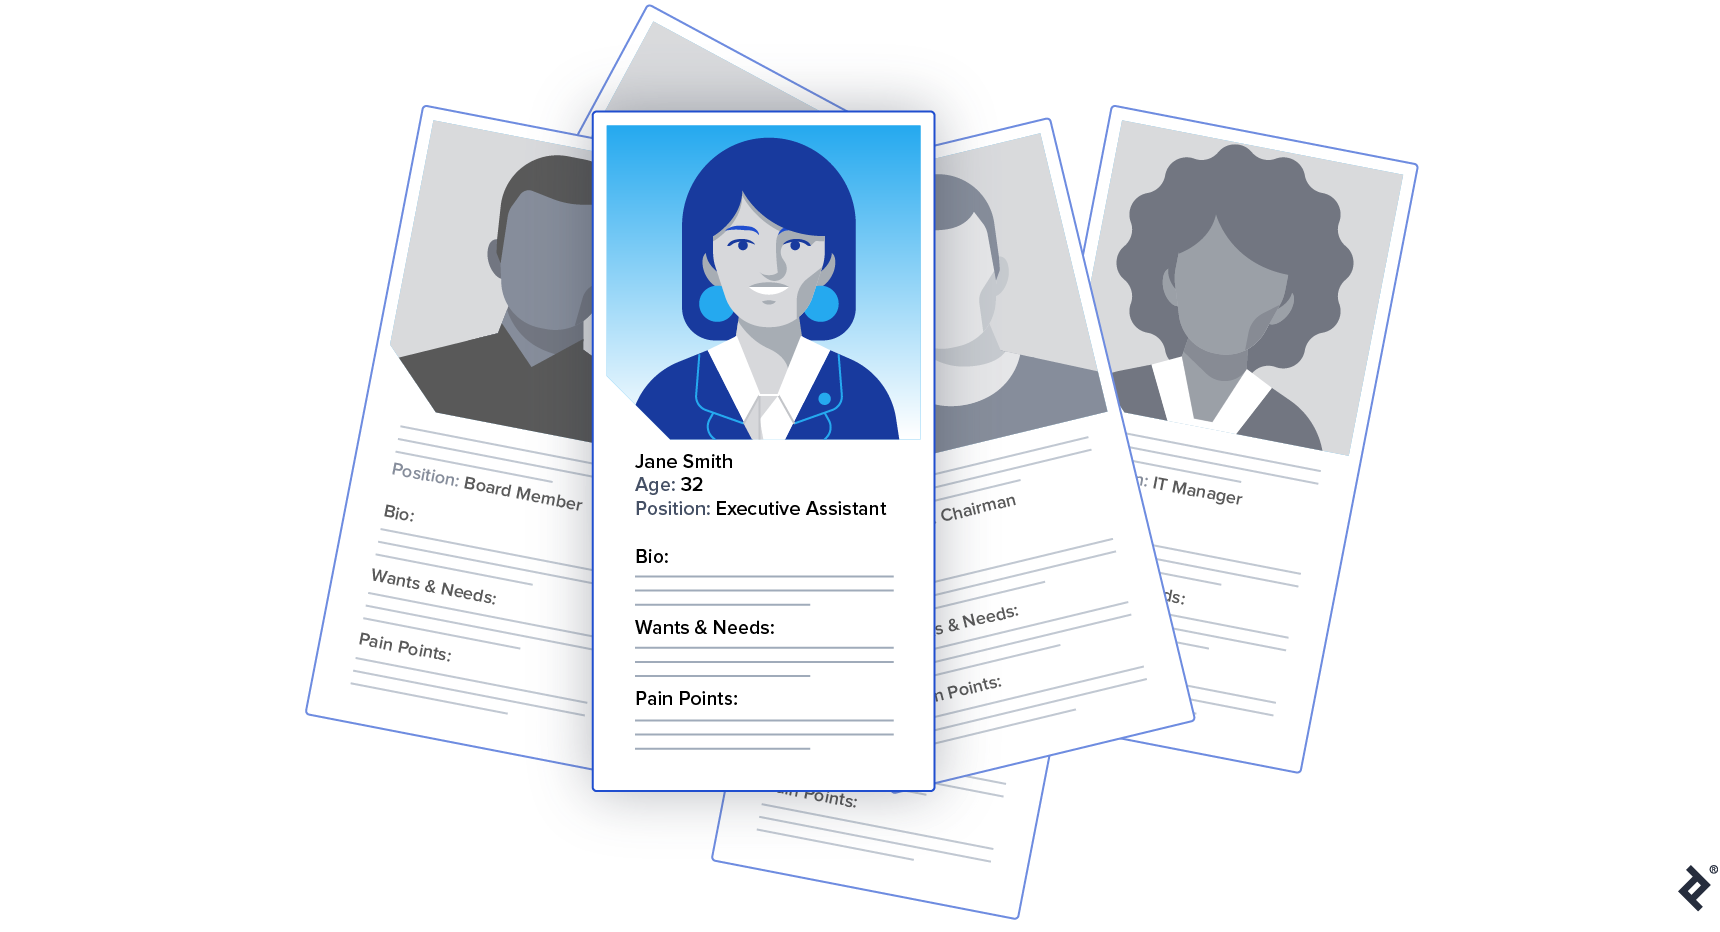 The product manager convinced the team to add a new persona profile archetype.